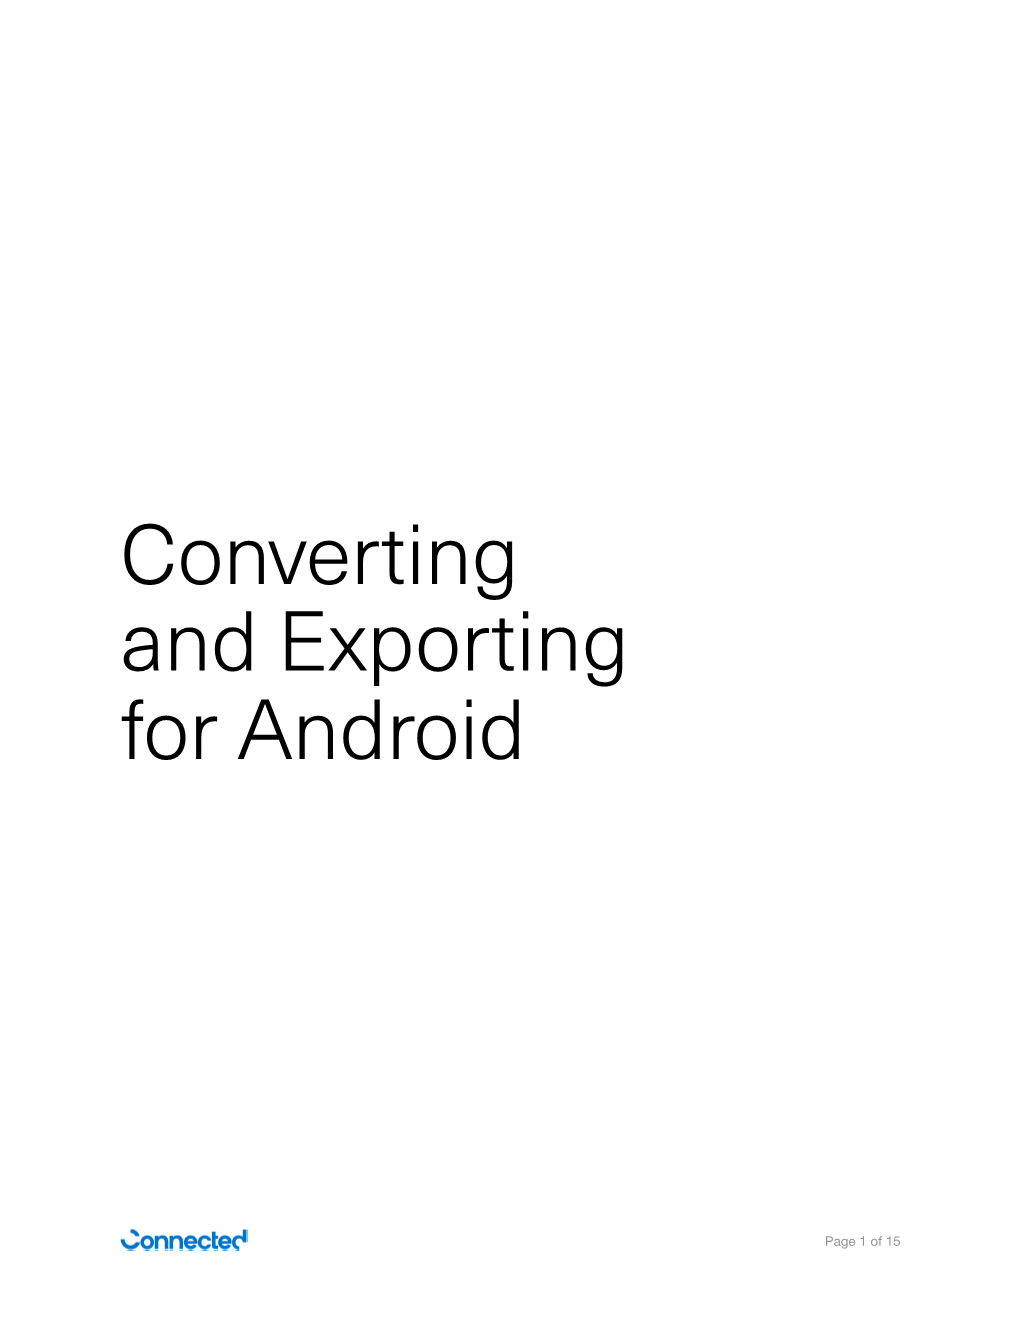 Converting and Exporting for Android